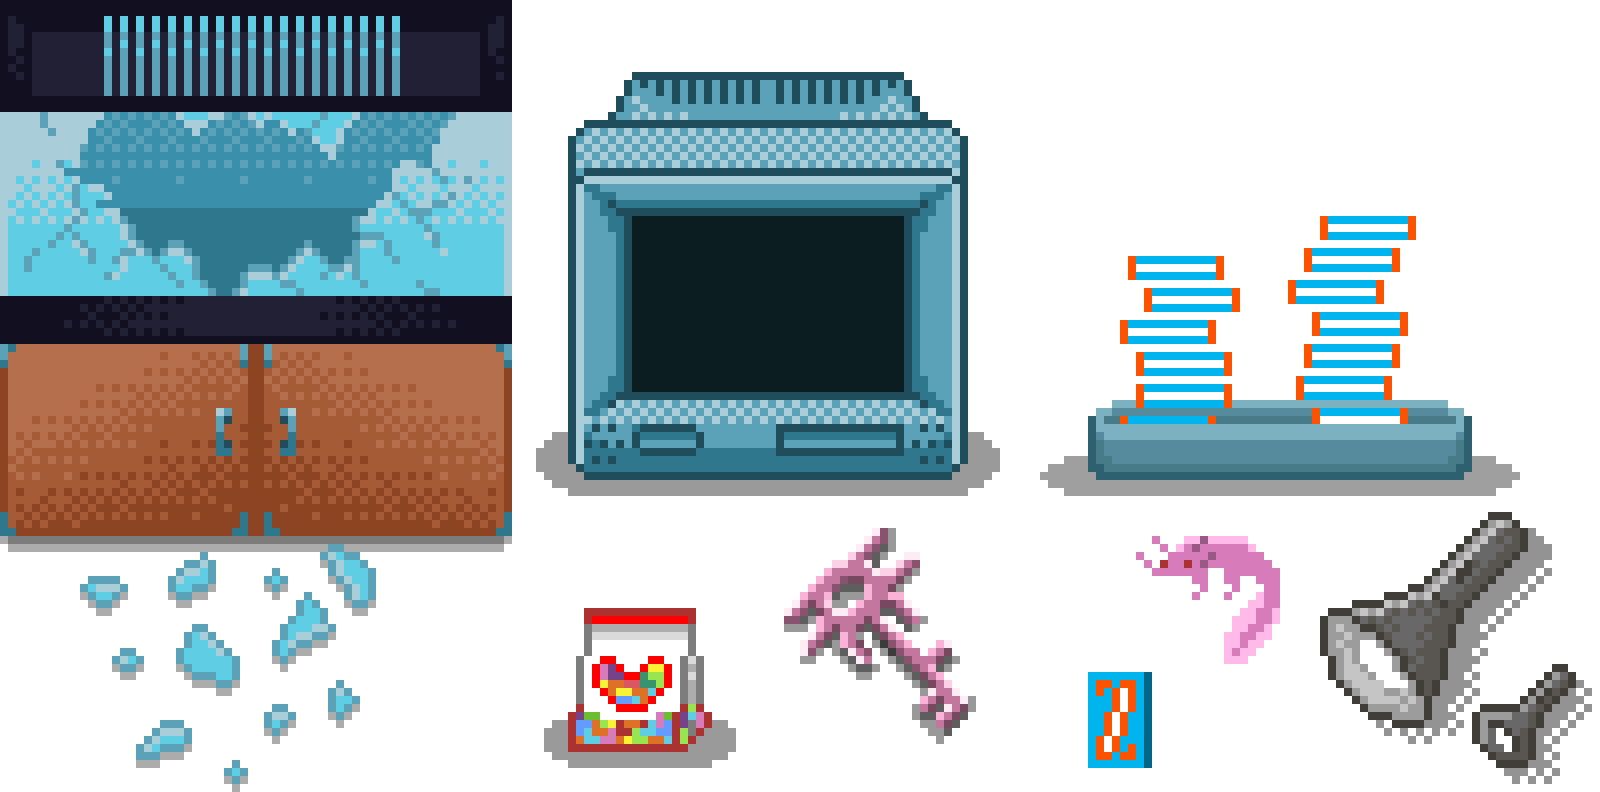 Aquarium tank, CRT TV, stack of VHS tape cases, a bag of jelly beans, an axolotl key and toy, a singular vhs tape box, and two flashlight sprites: a smaller sprite at the player scale, and a bigger sprite for the inventory.